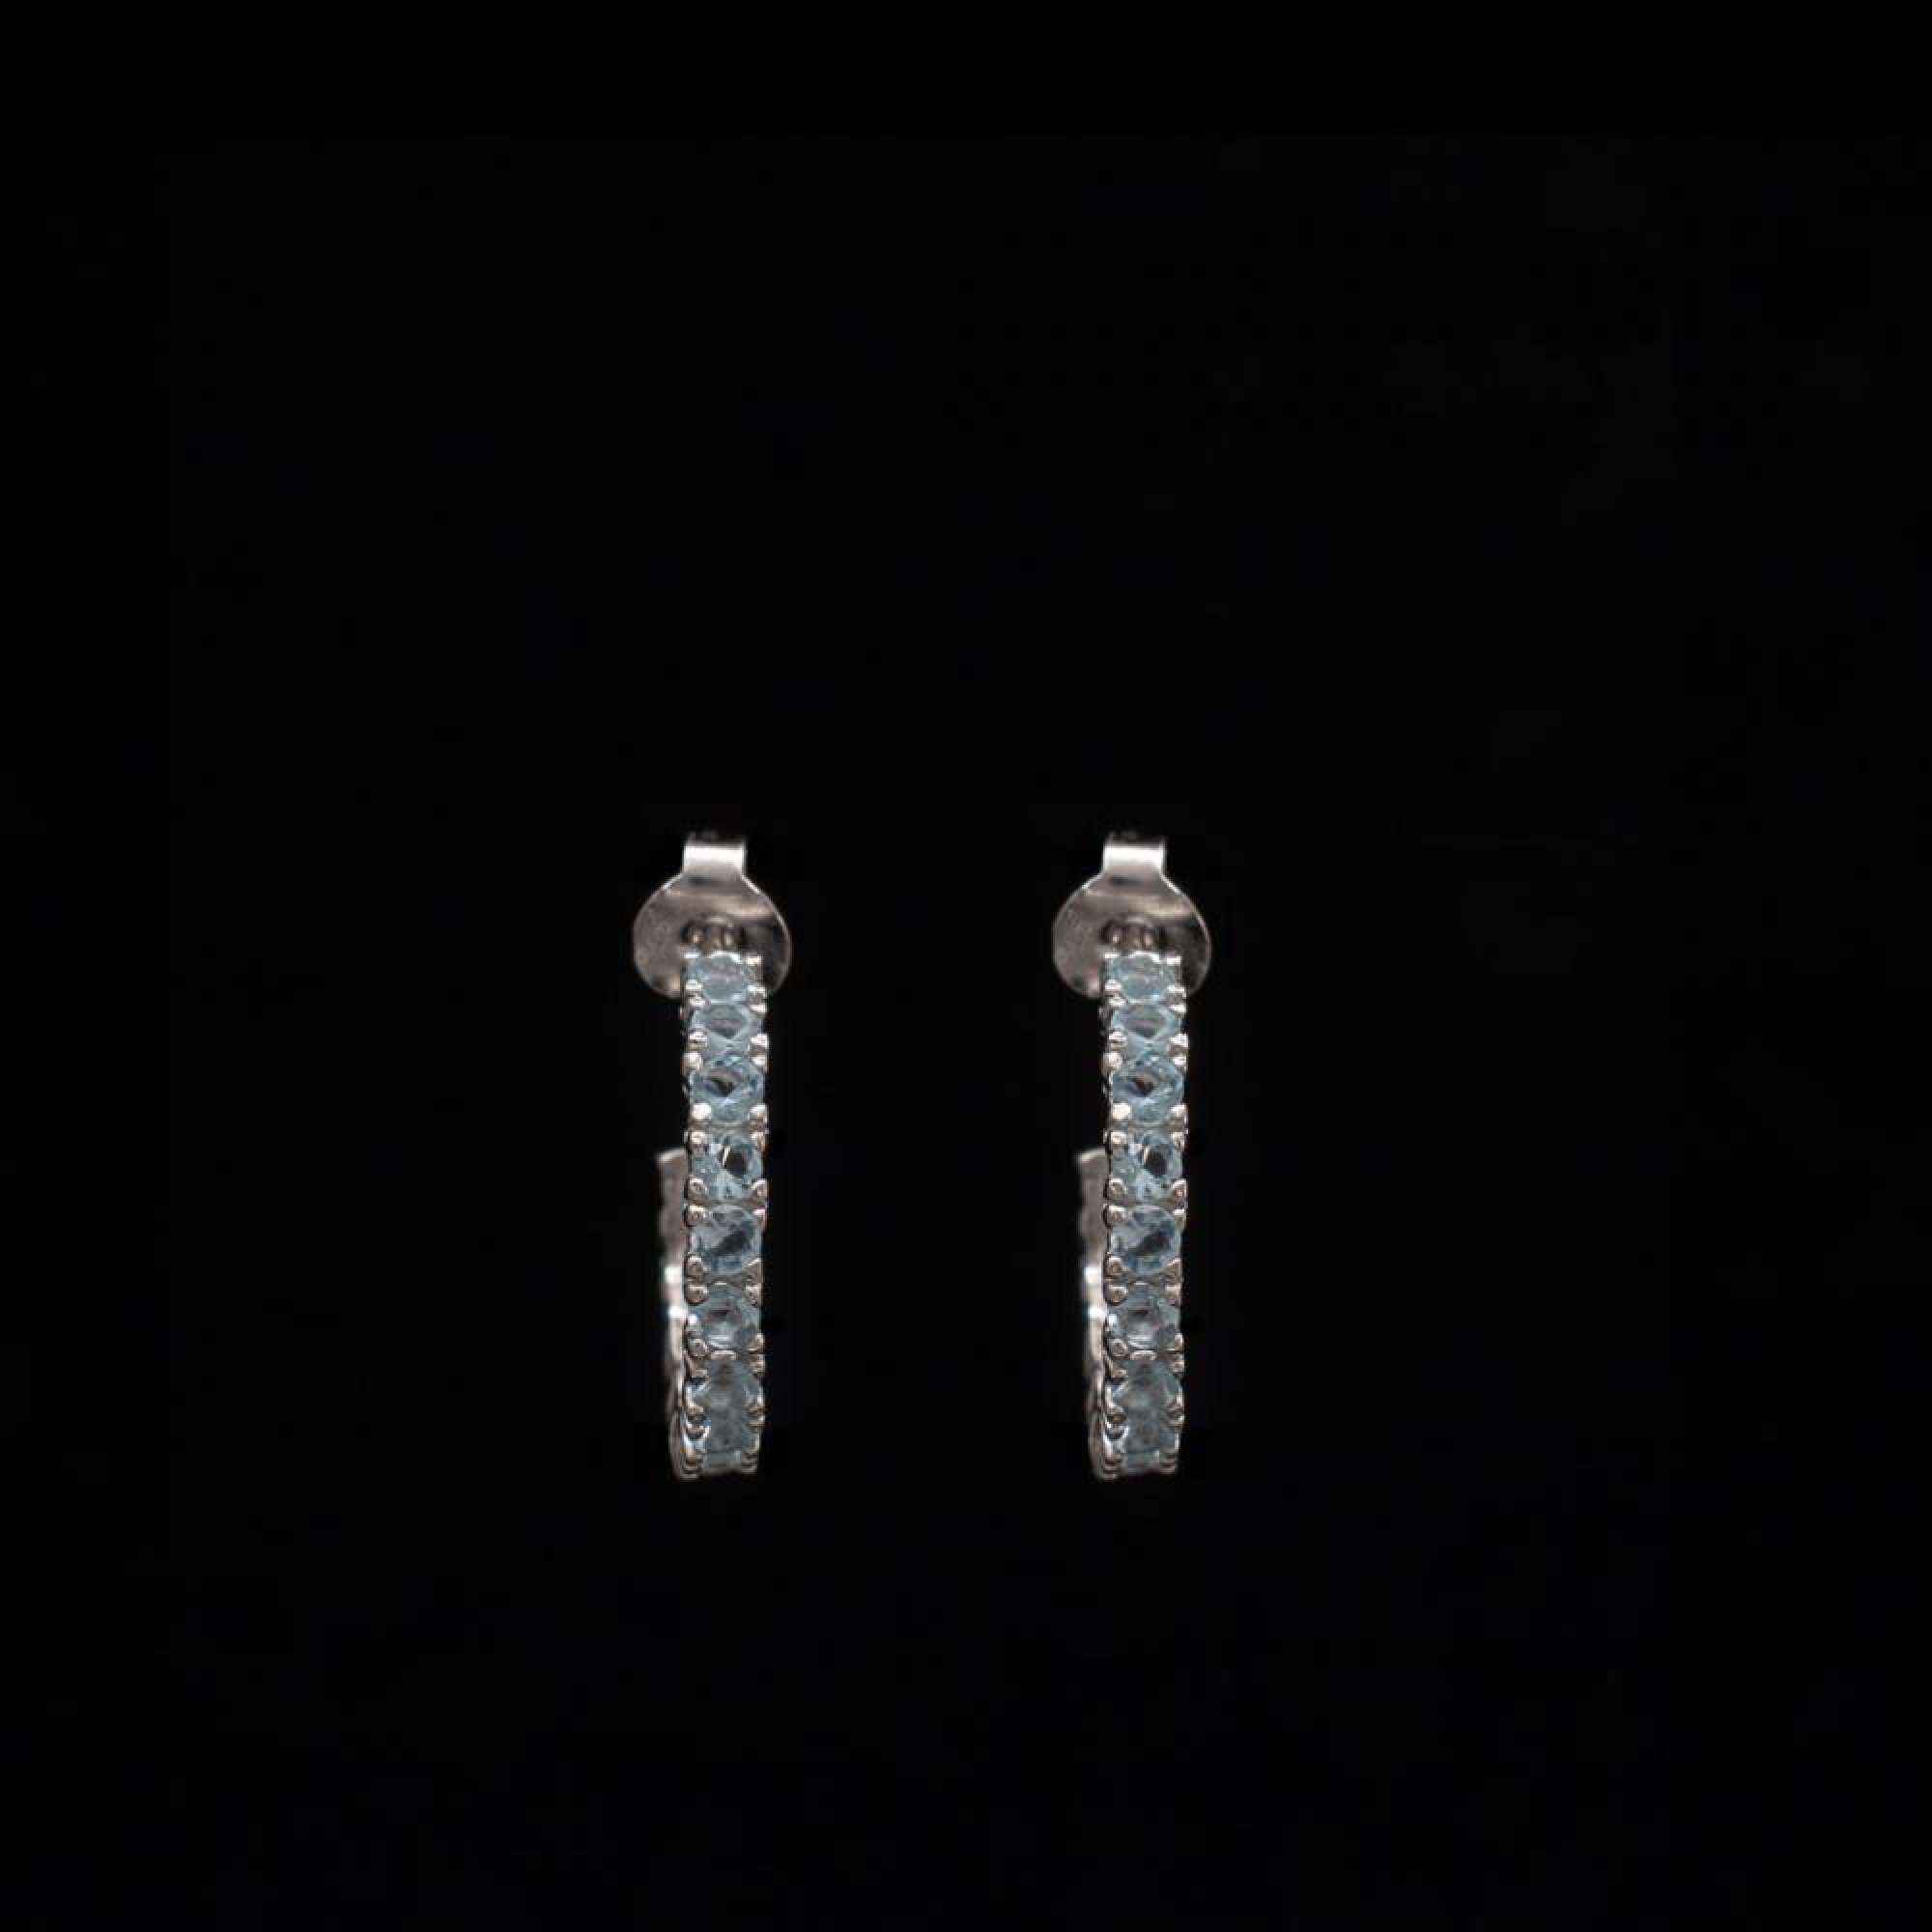 Silver earrings with aquamarine stones